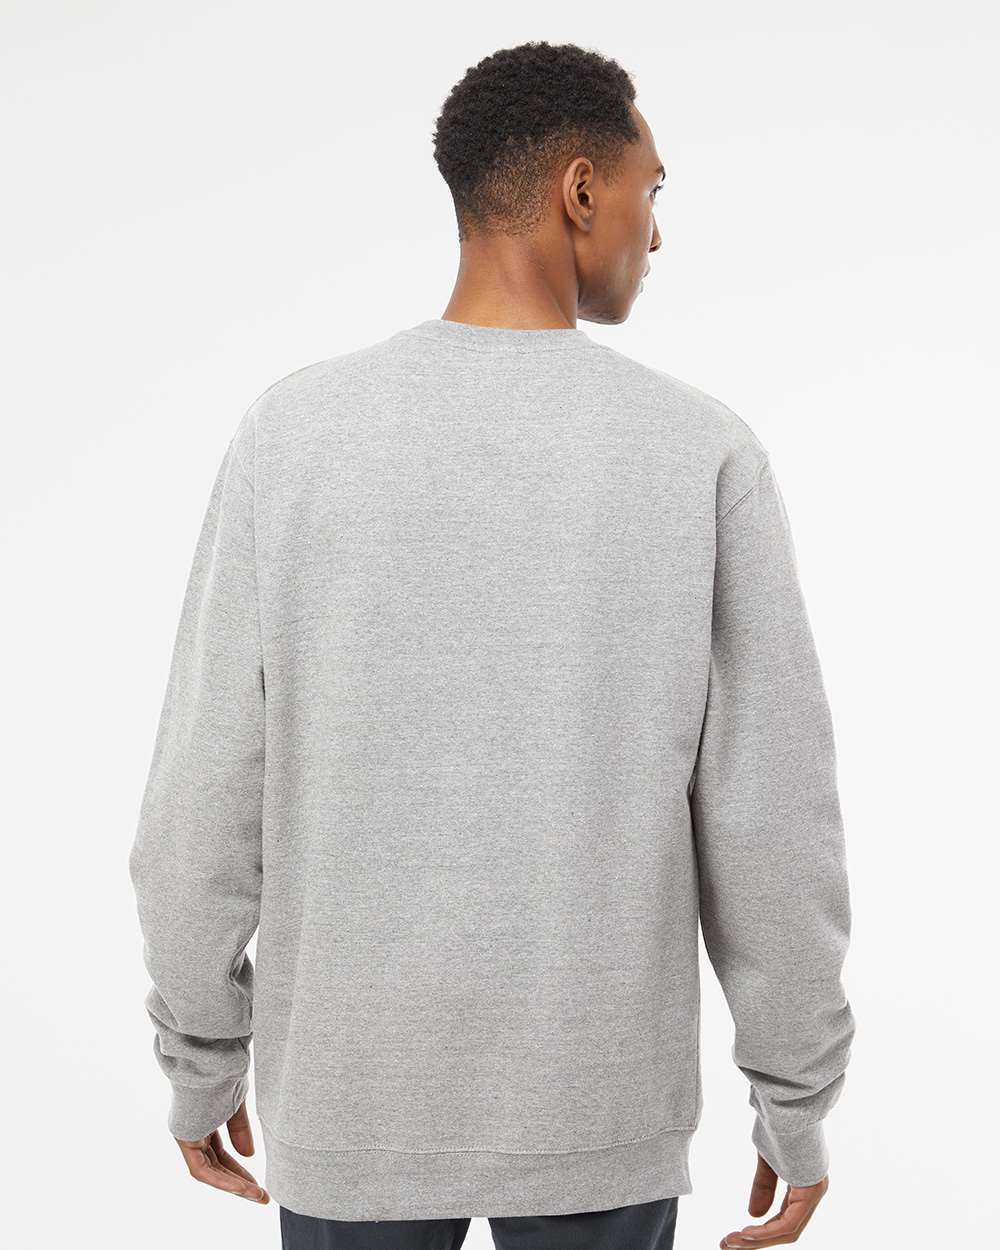 Independent Trading Co. Midweight Sweatshirt SS3000 #colormdl_Grey Heather